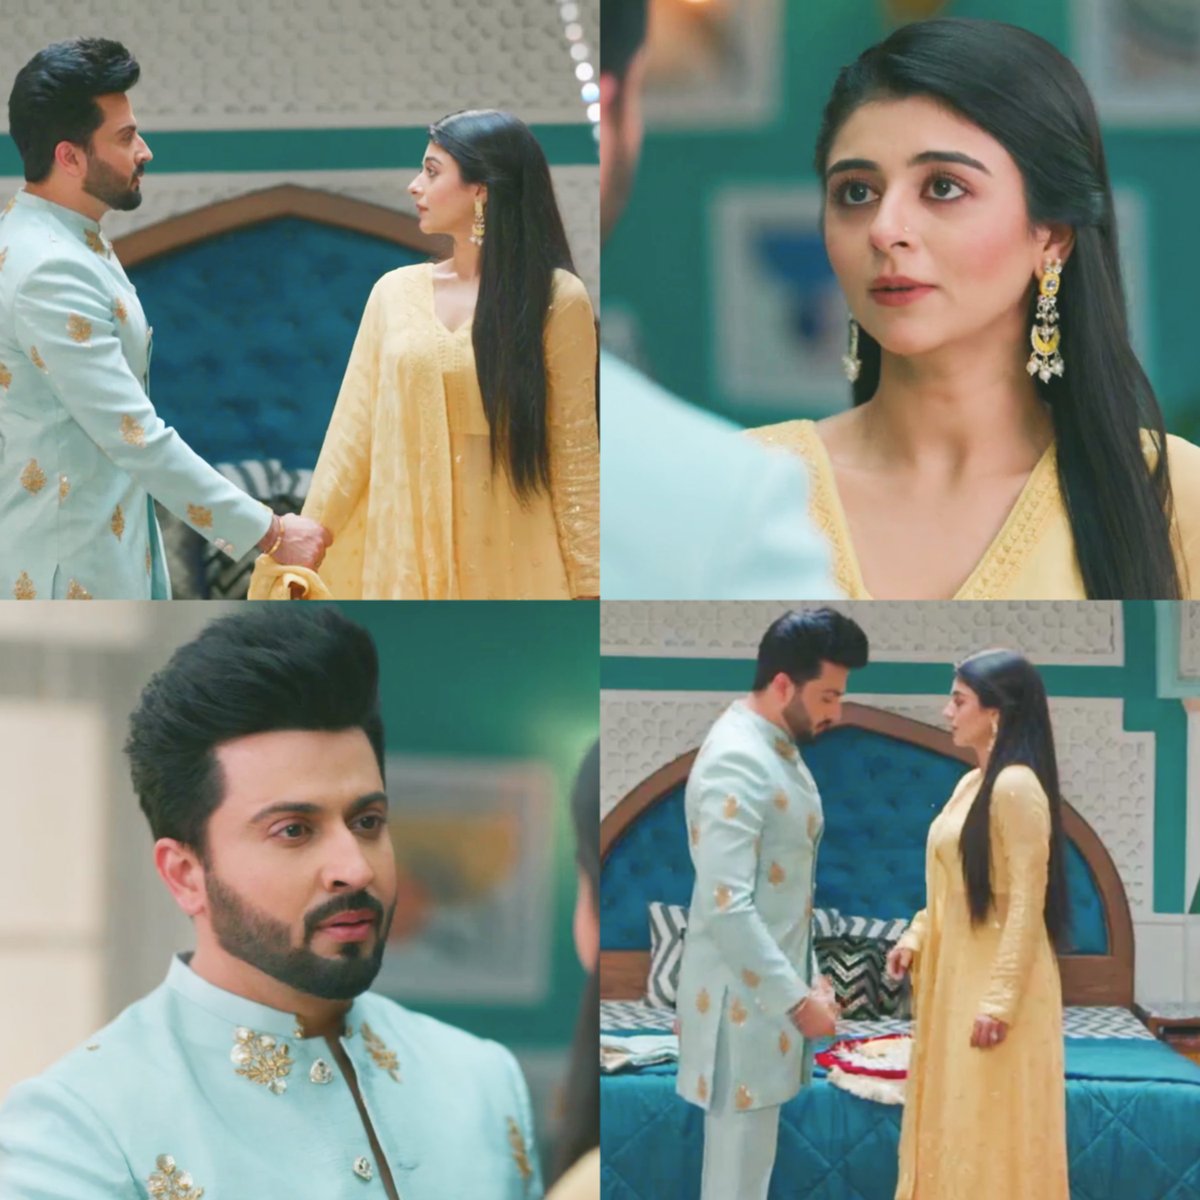 does Subhaan even realize what he's doing? 

this is just more than just apologizing to someone who is already learning to live without you

#DheerajDhoopar #SubhaanSiddiqui #YeshaRughani #IbadatAkhtar #IbHaan #RabbSeHaiDua